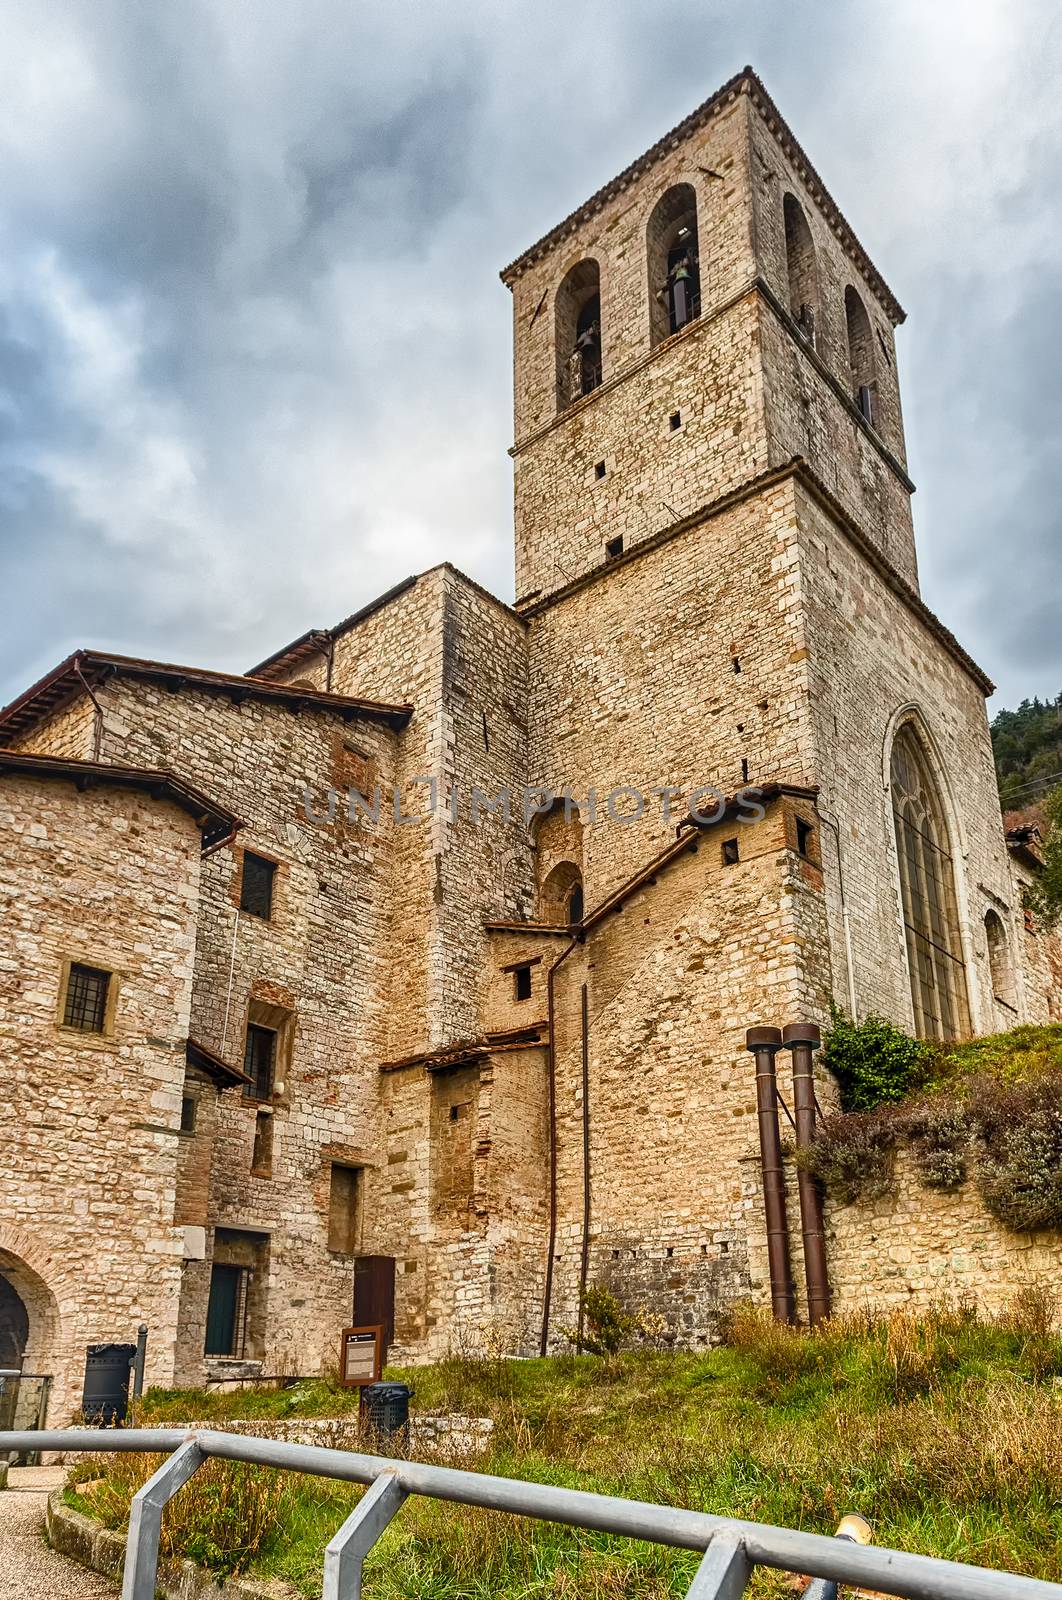 Exterior view of the medieval Cathedral of Gubbio, Italy by marcorubino